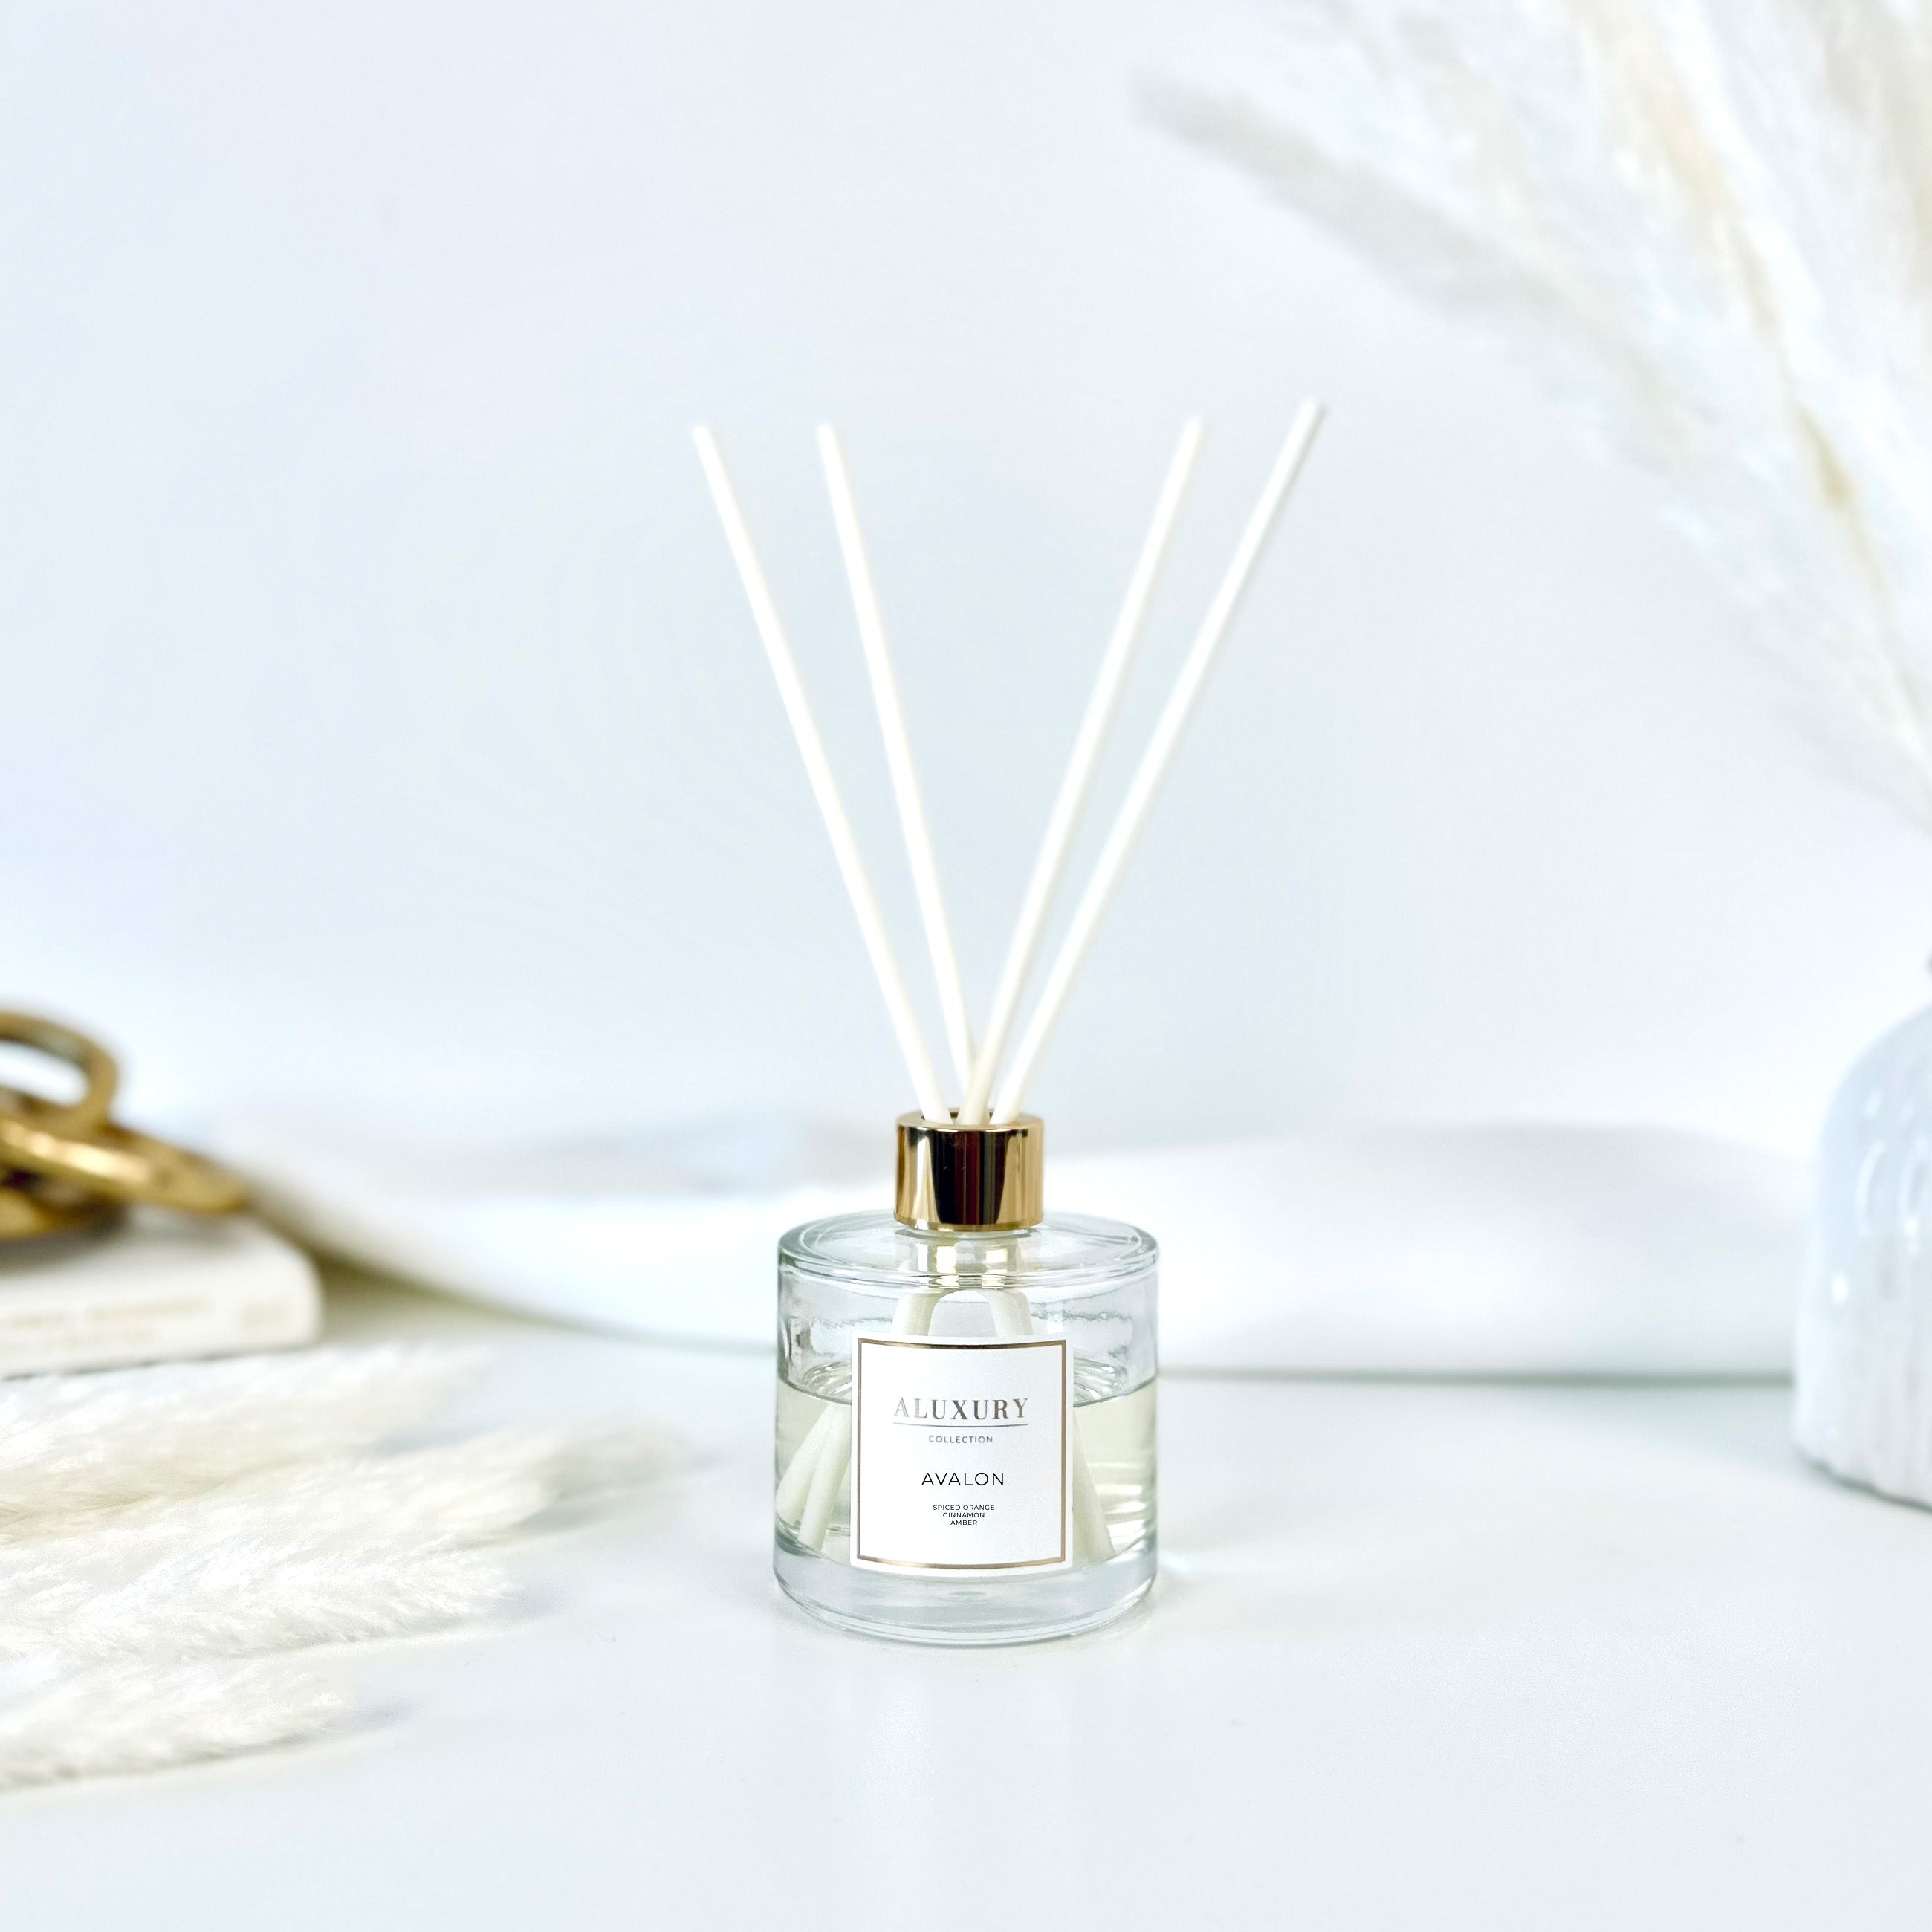 Avalon Luxury Reed Diffuser by Aluxury